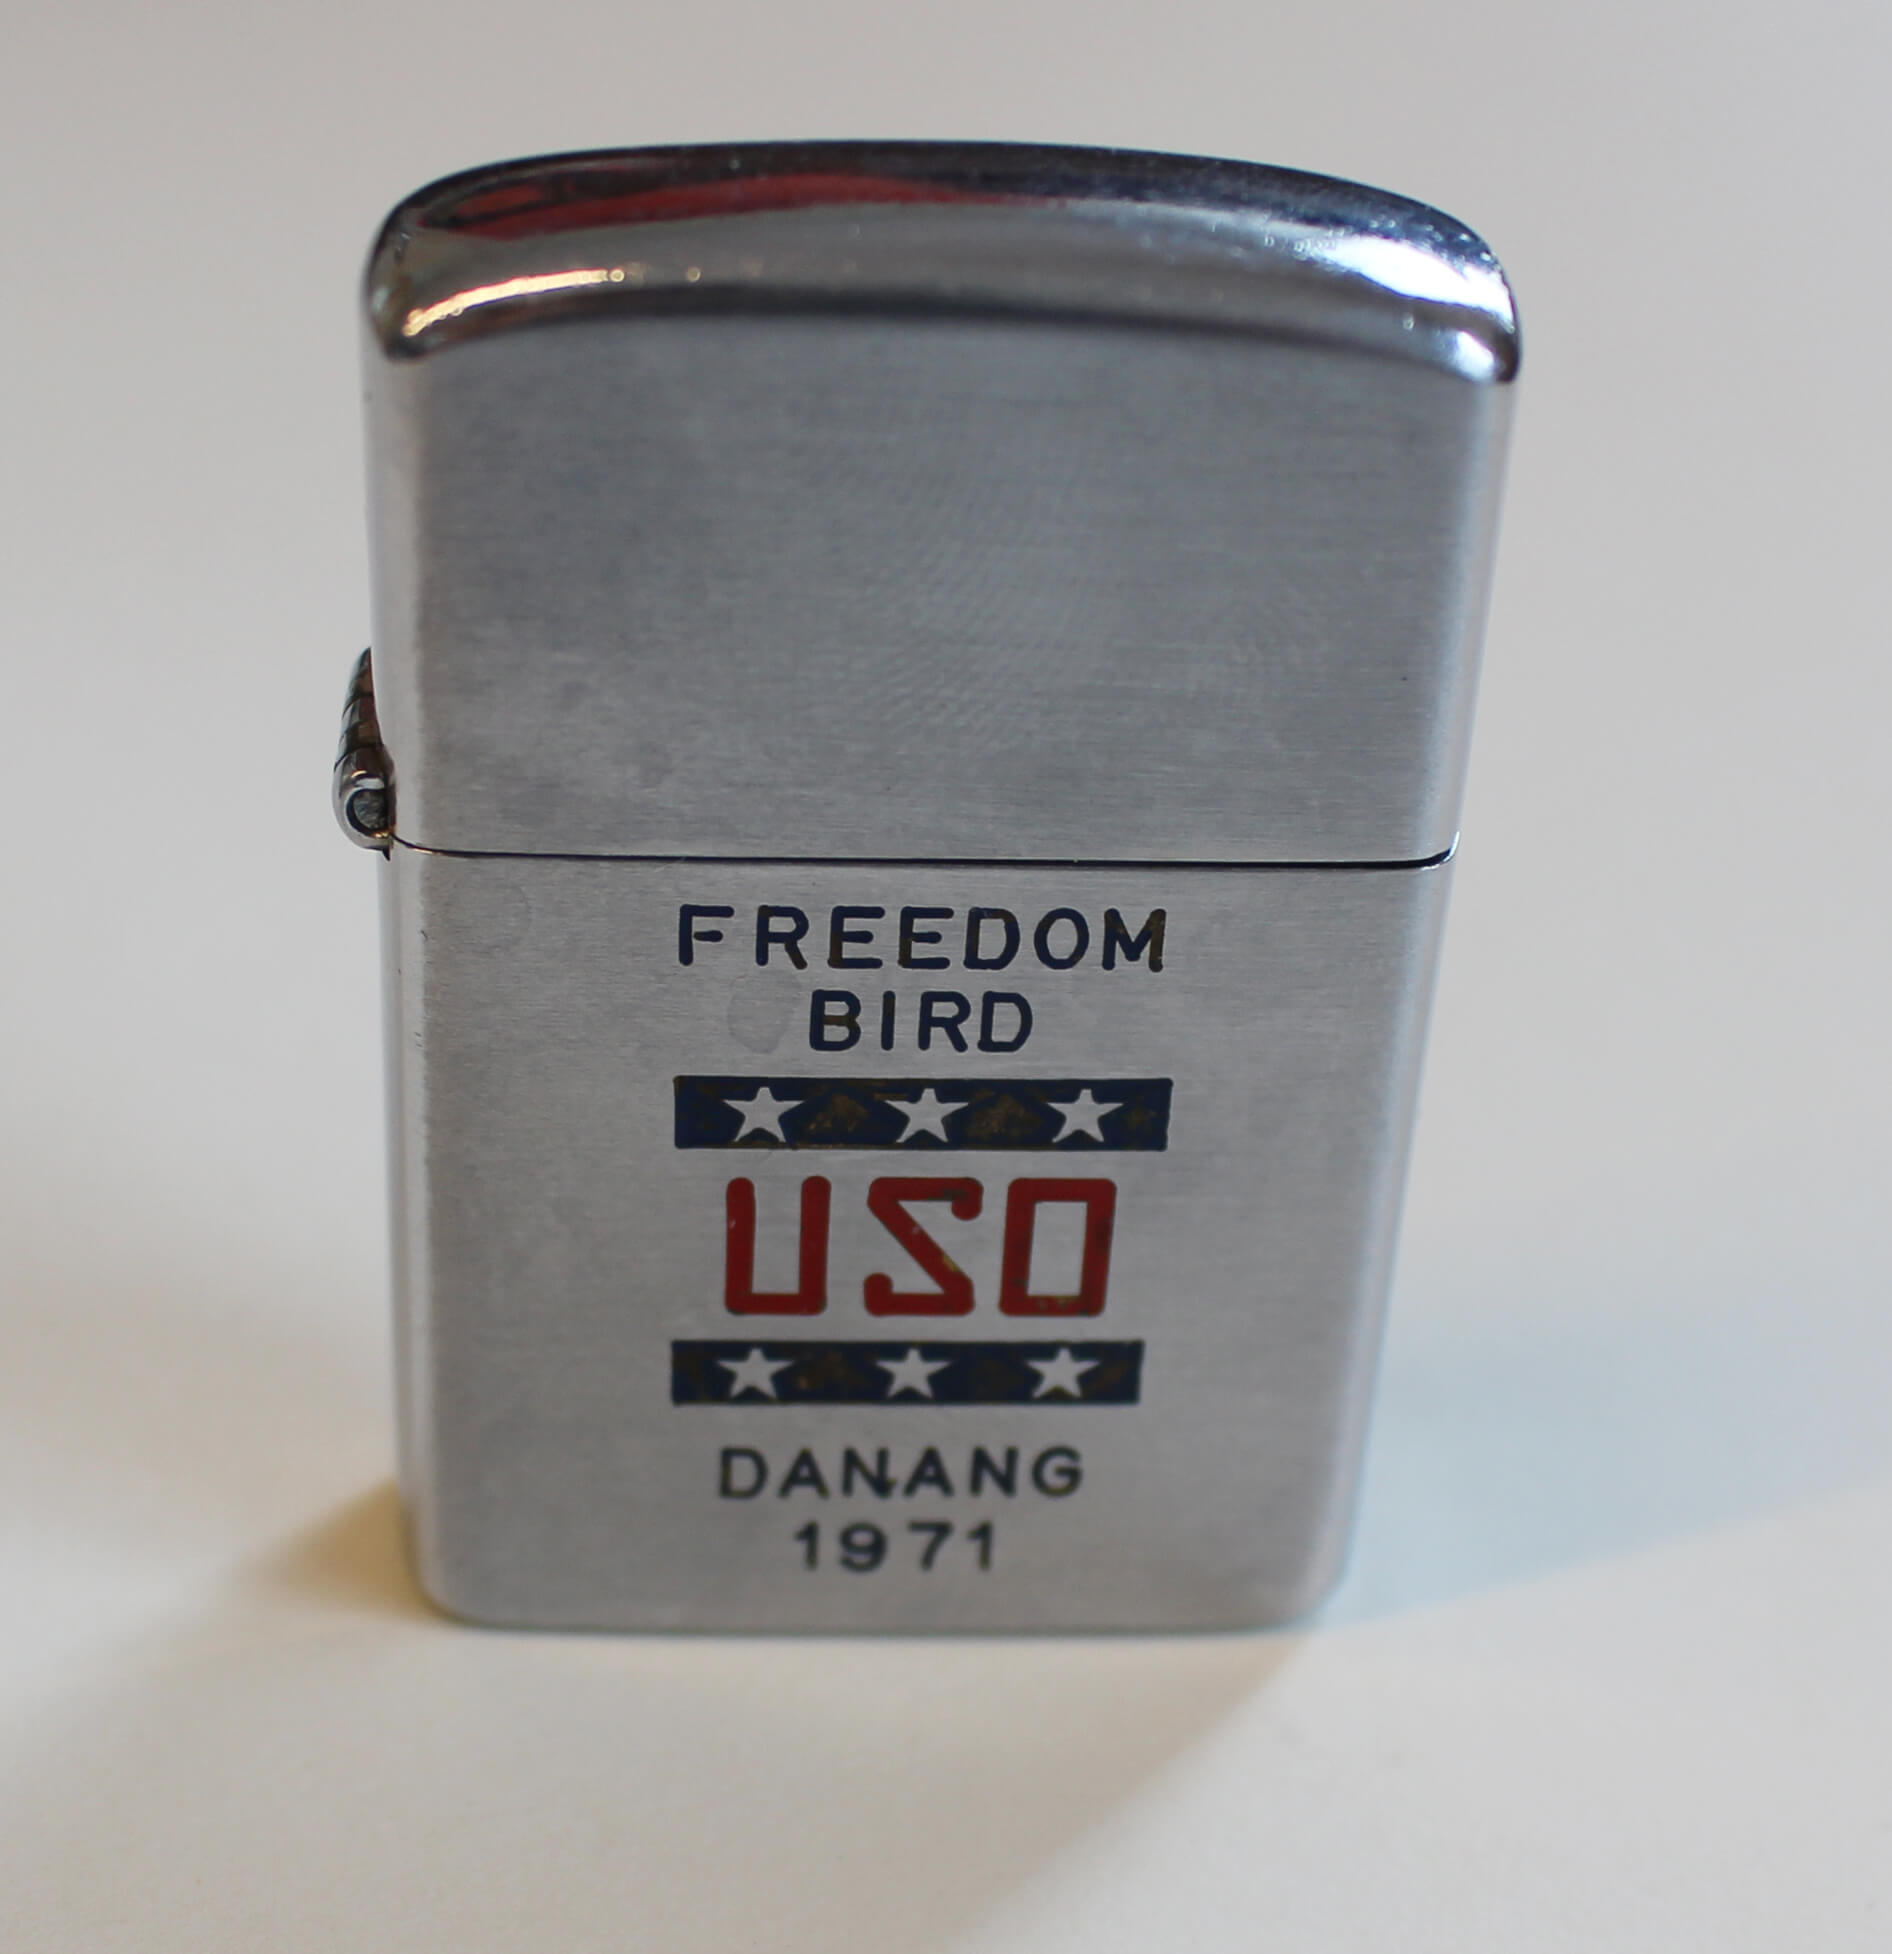 Lighter with text Freedom Bird USO, Danang 1971